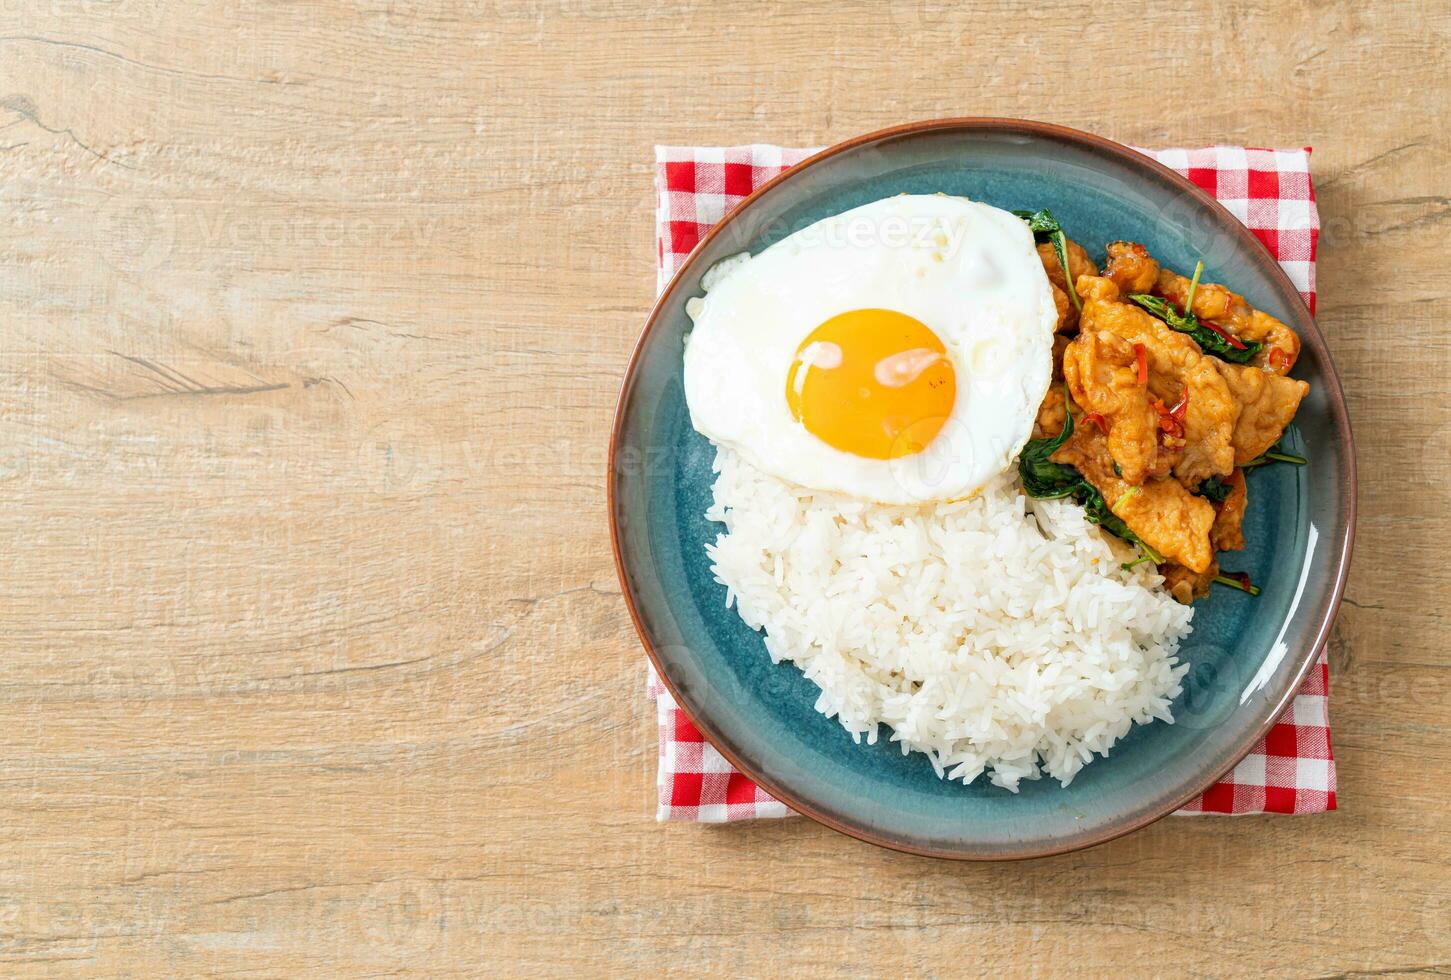 stir-fried fried fish with basil and fried egg topped on rice photo